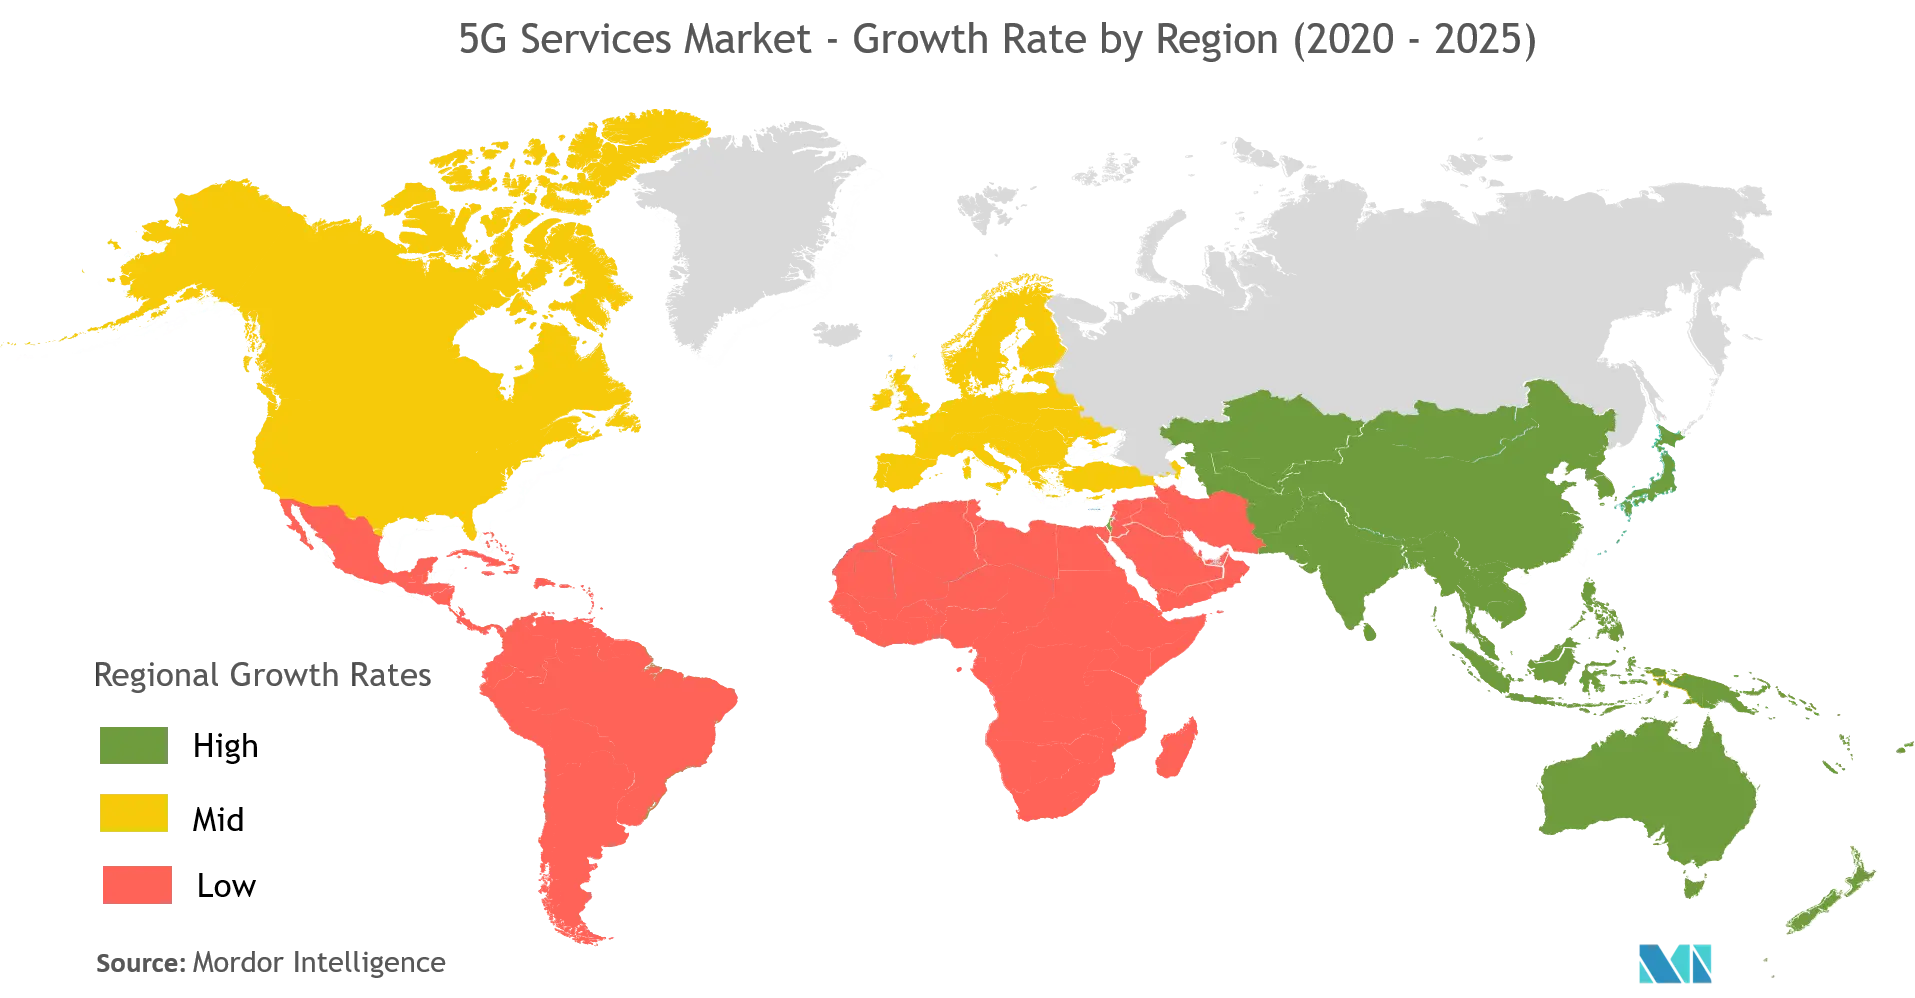 5G Services Market Growth by Region